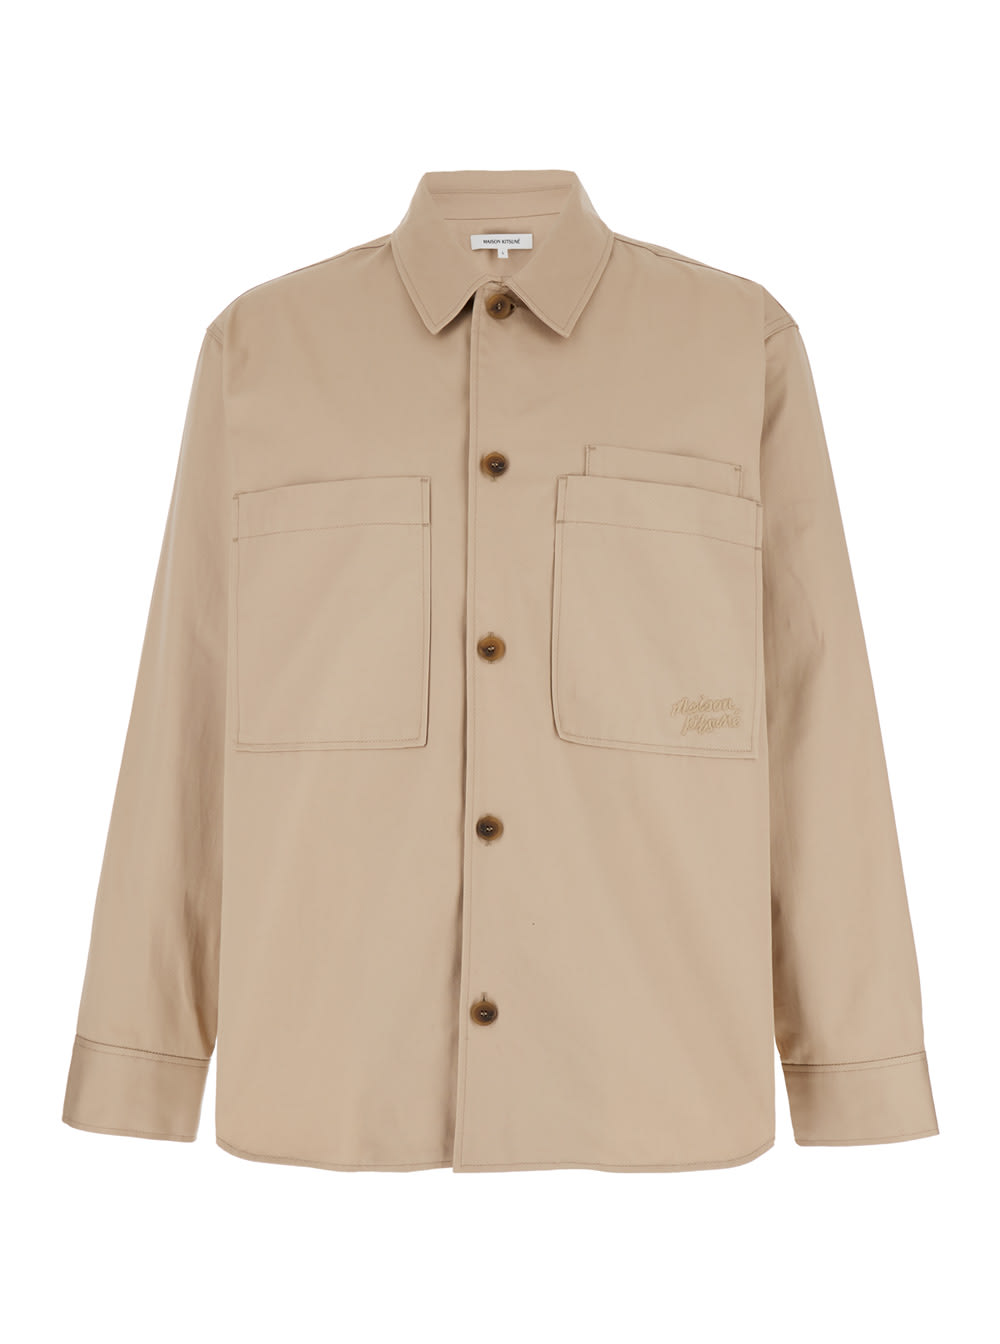 Maison Kitsuné Beige Overshirt With Pockets In Cotton Man